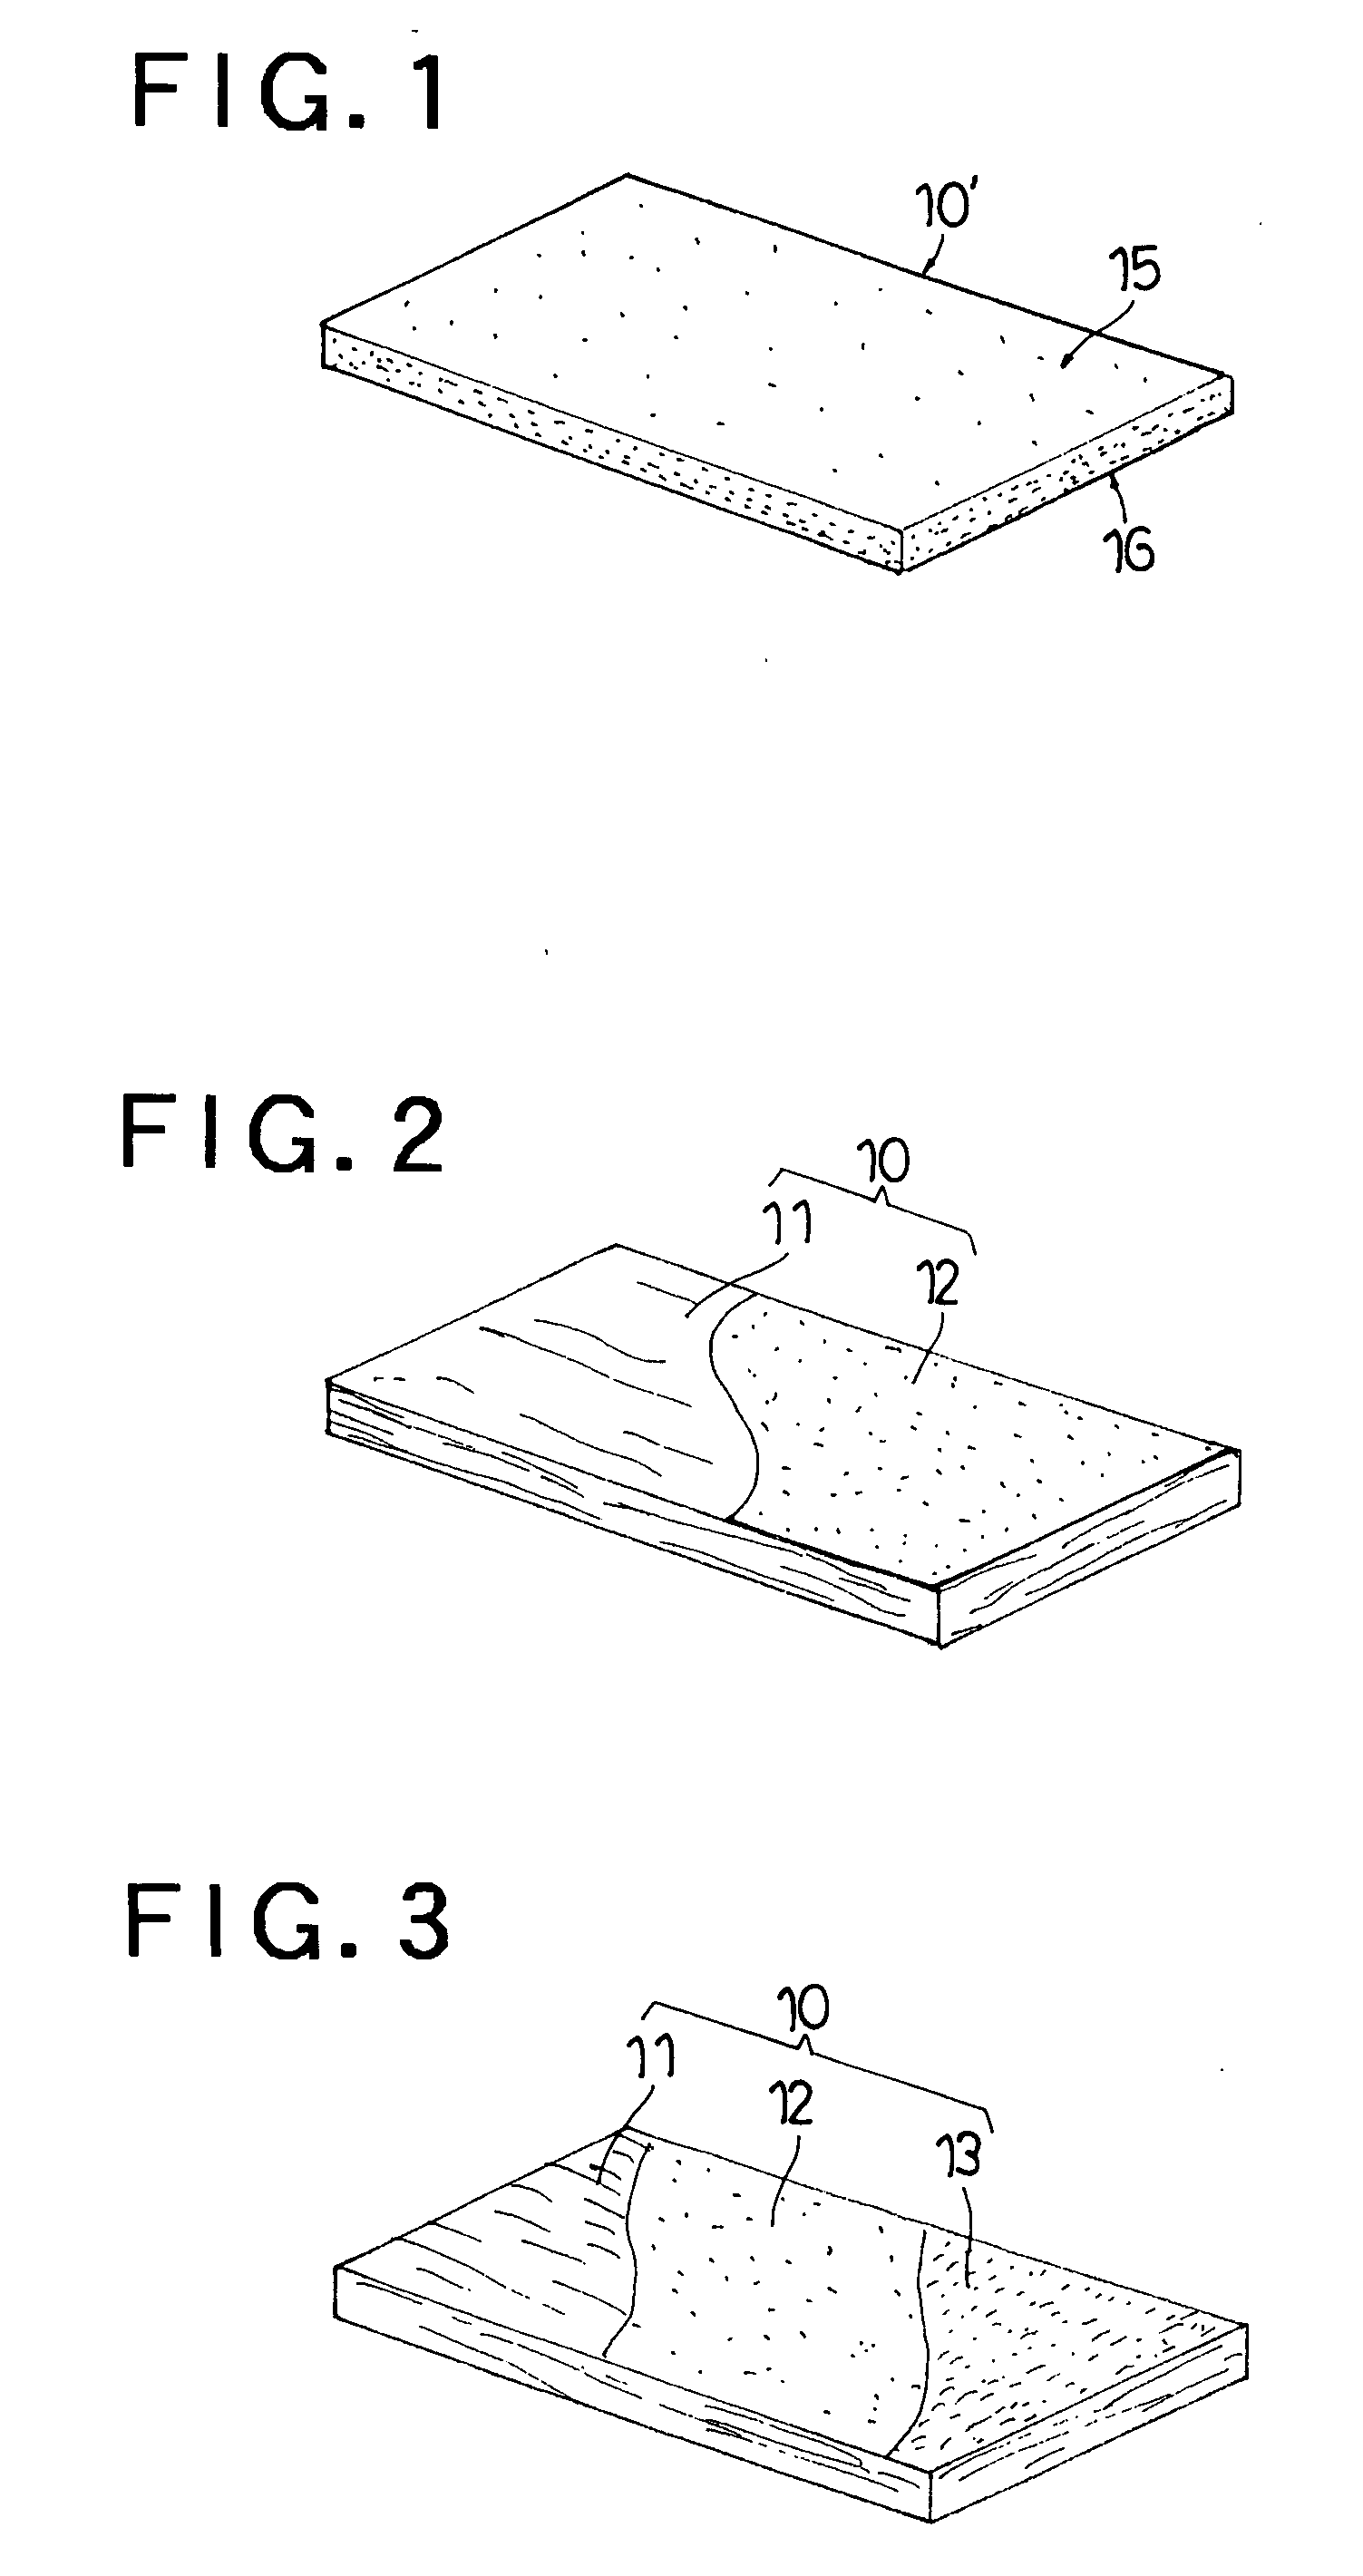 Dental Material And Composite Dental Material Formed By Using Hydroxy Apatite